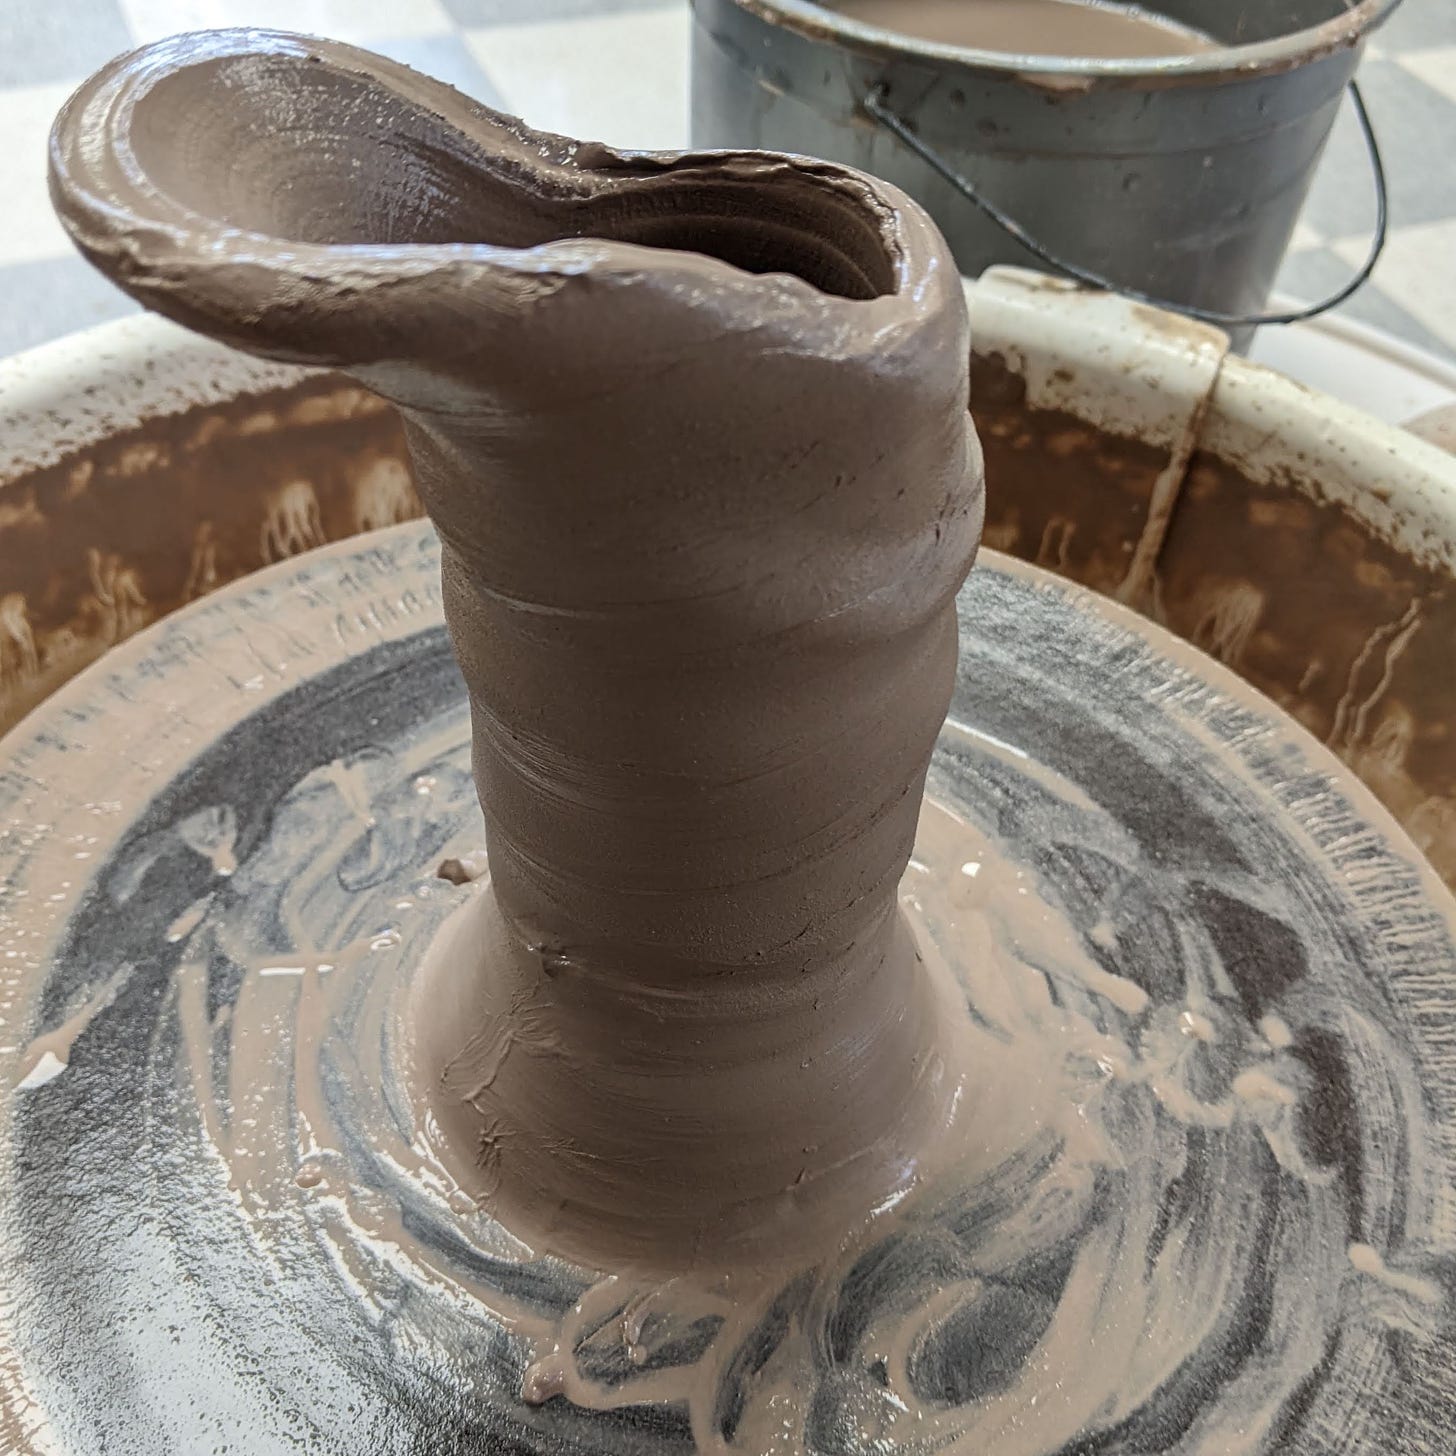 Wonky failed attempt at a pottery cylinder, with a spouty looking edge off to the side, on a wet bat, on a pottery wheel